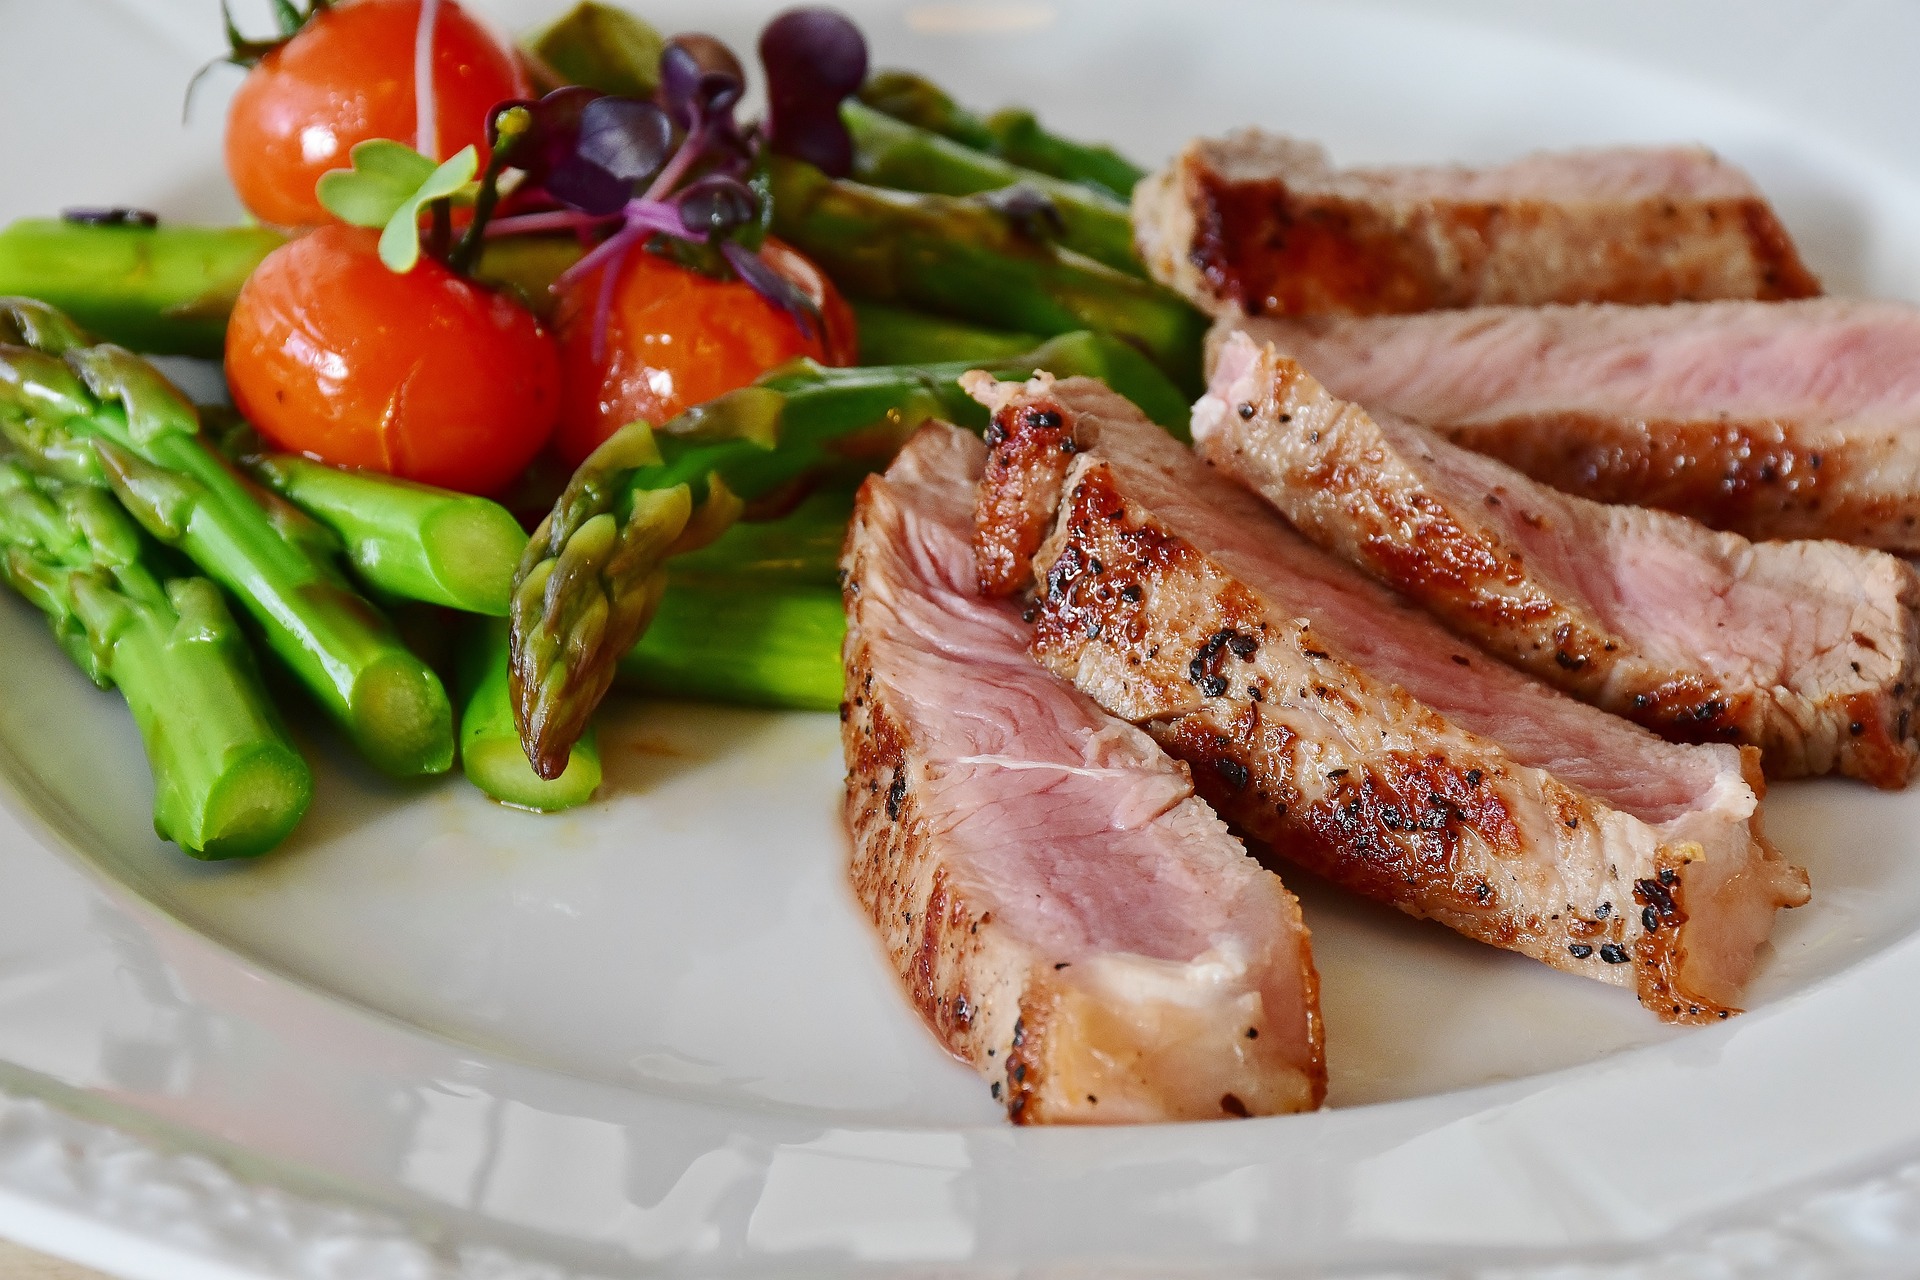 A good diet and mental health, such as this plate of asparagus and protein, are linked.